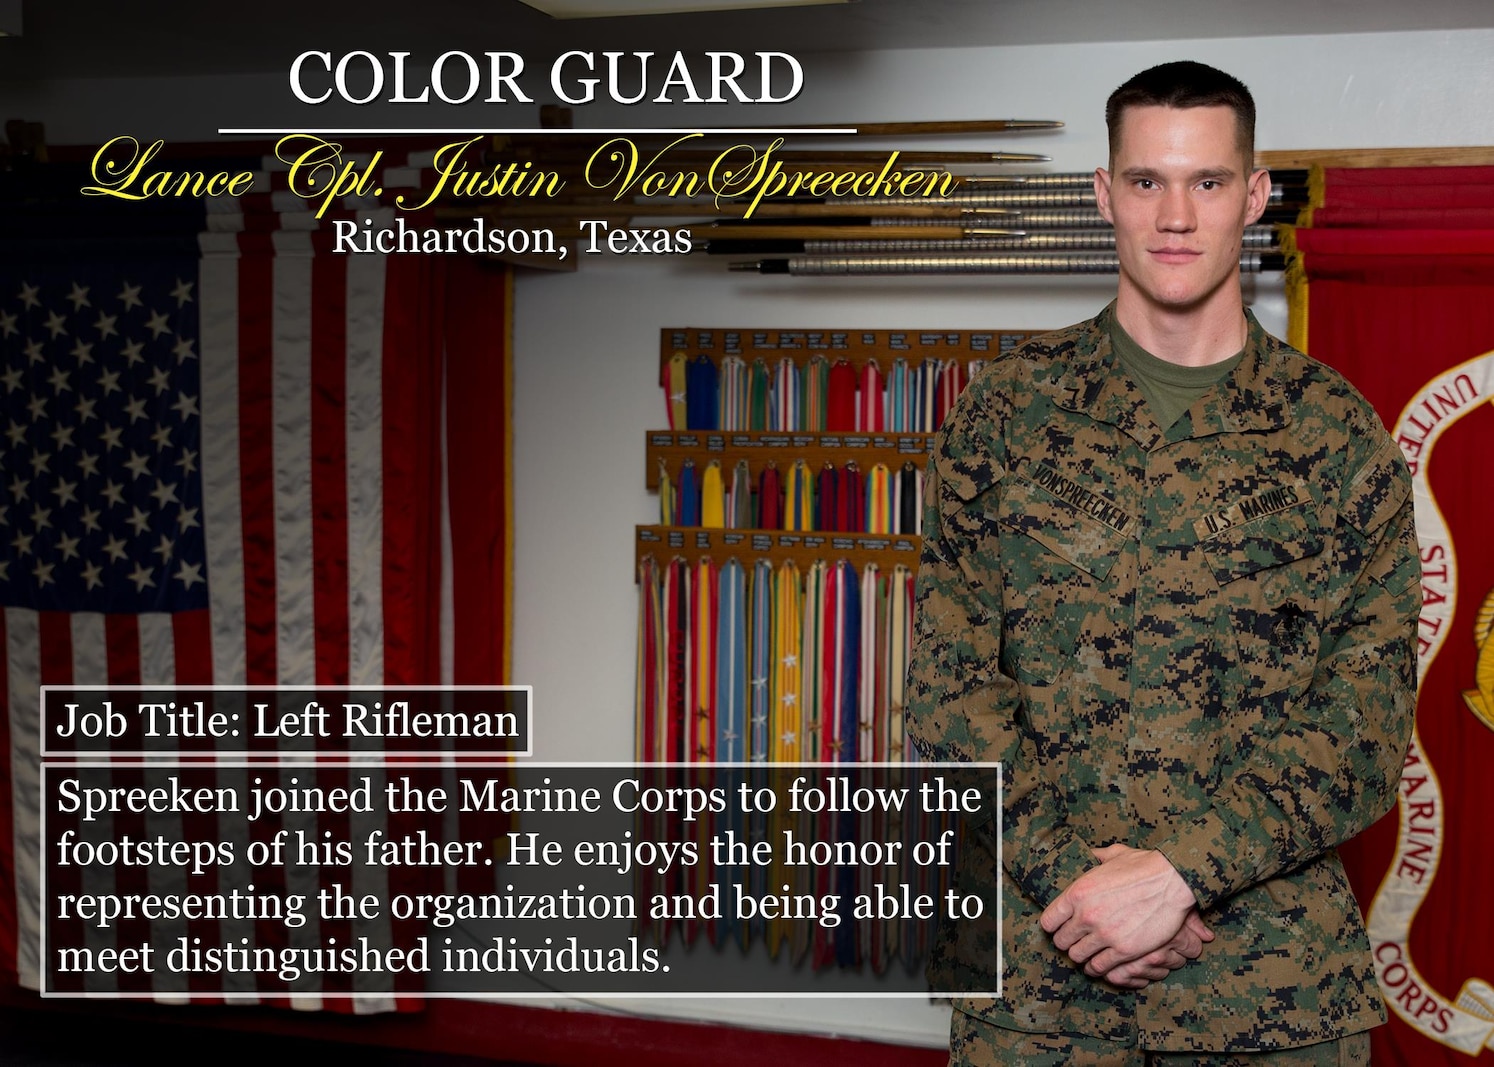 Lance Cpl. Justin VonSpreecken
Richardson, Texas
Job Title: Left Rifleman
Spreeken joined the Marine Corps to follow the footsteps of his father. He enjoys the honor of representing the organization and being able to meet distinguished individuals.
(Official Marine Corps graphic by Cpl. Chi Nguyen/Released)